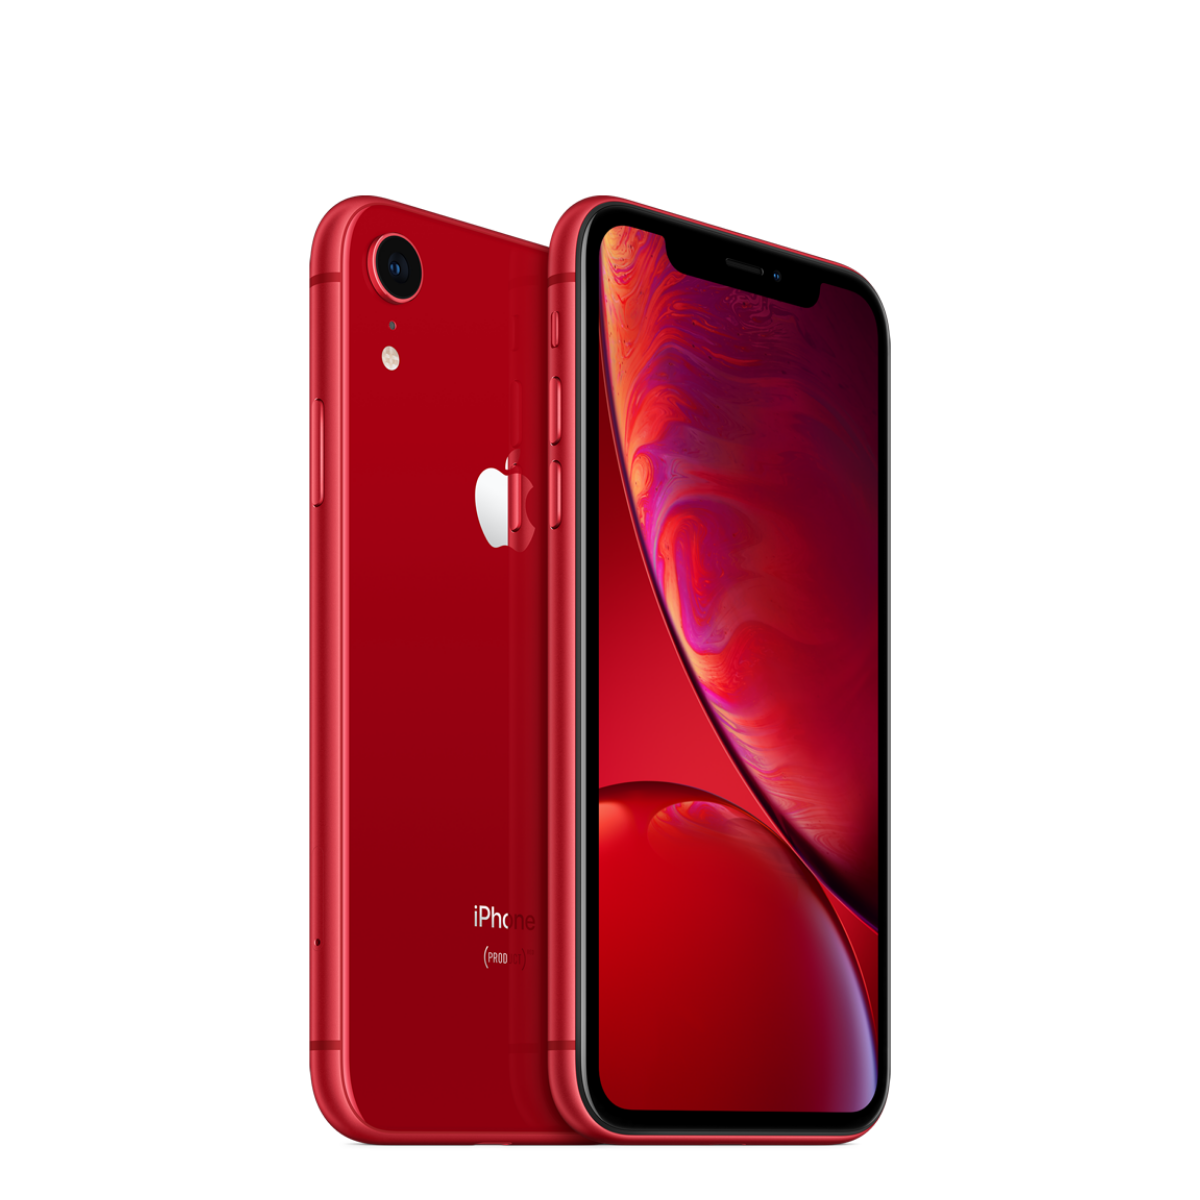 Sim Free Apple iPhone XR 64GB Unlocked Mobile Phone - Product Red